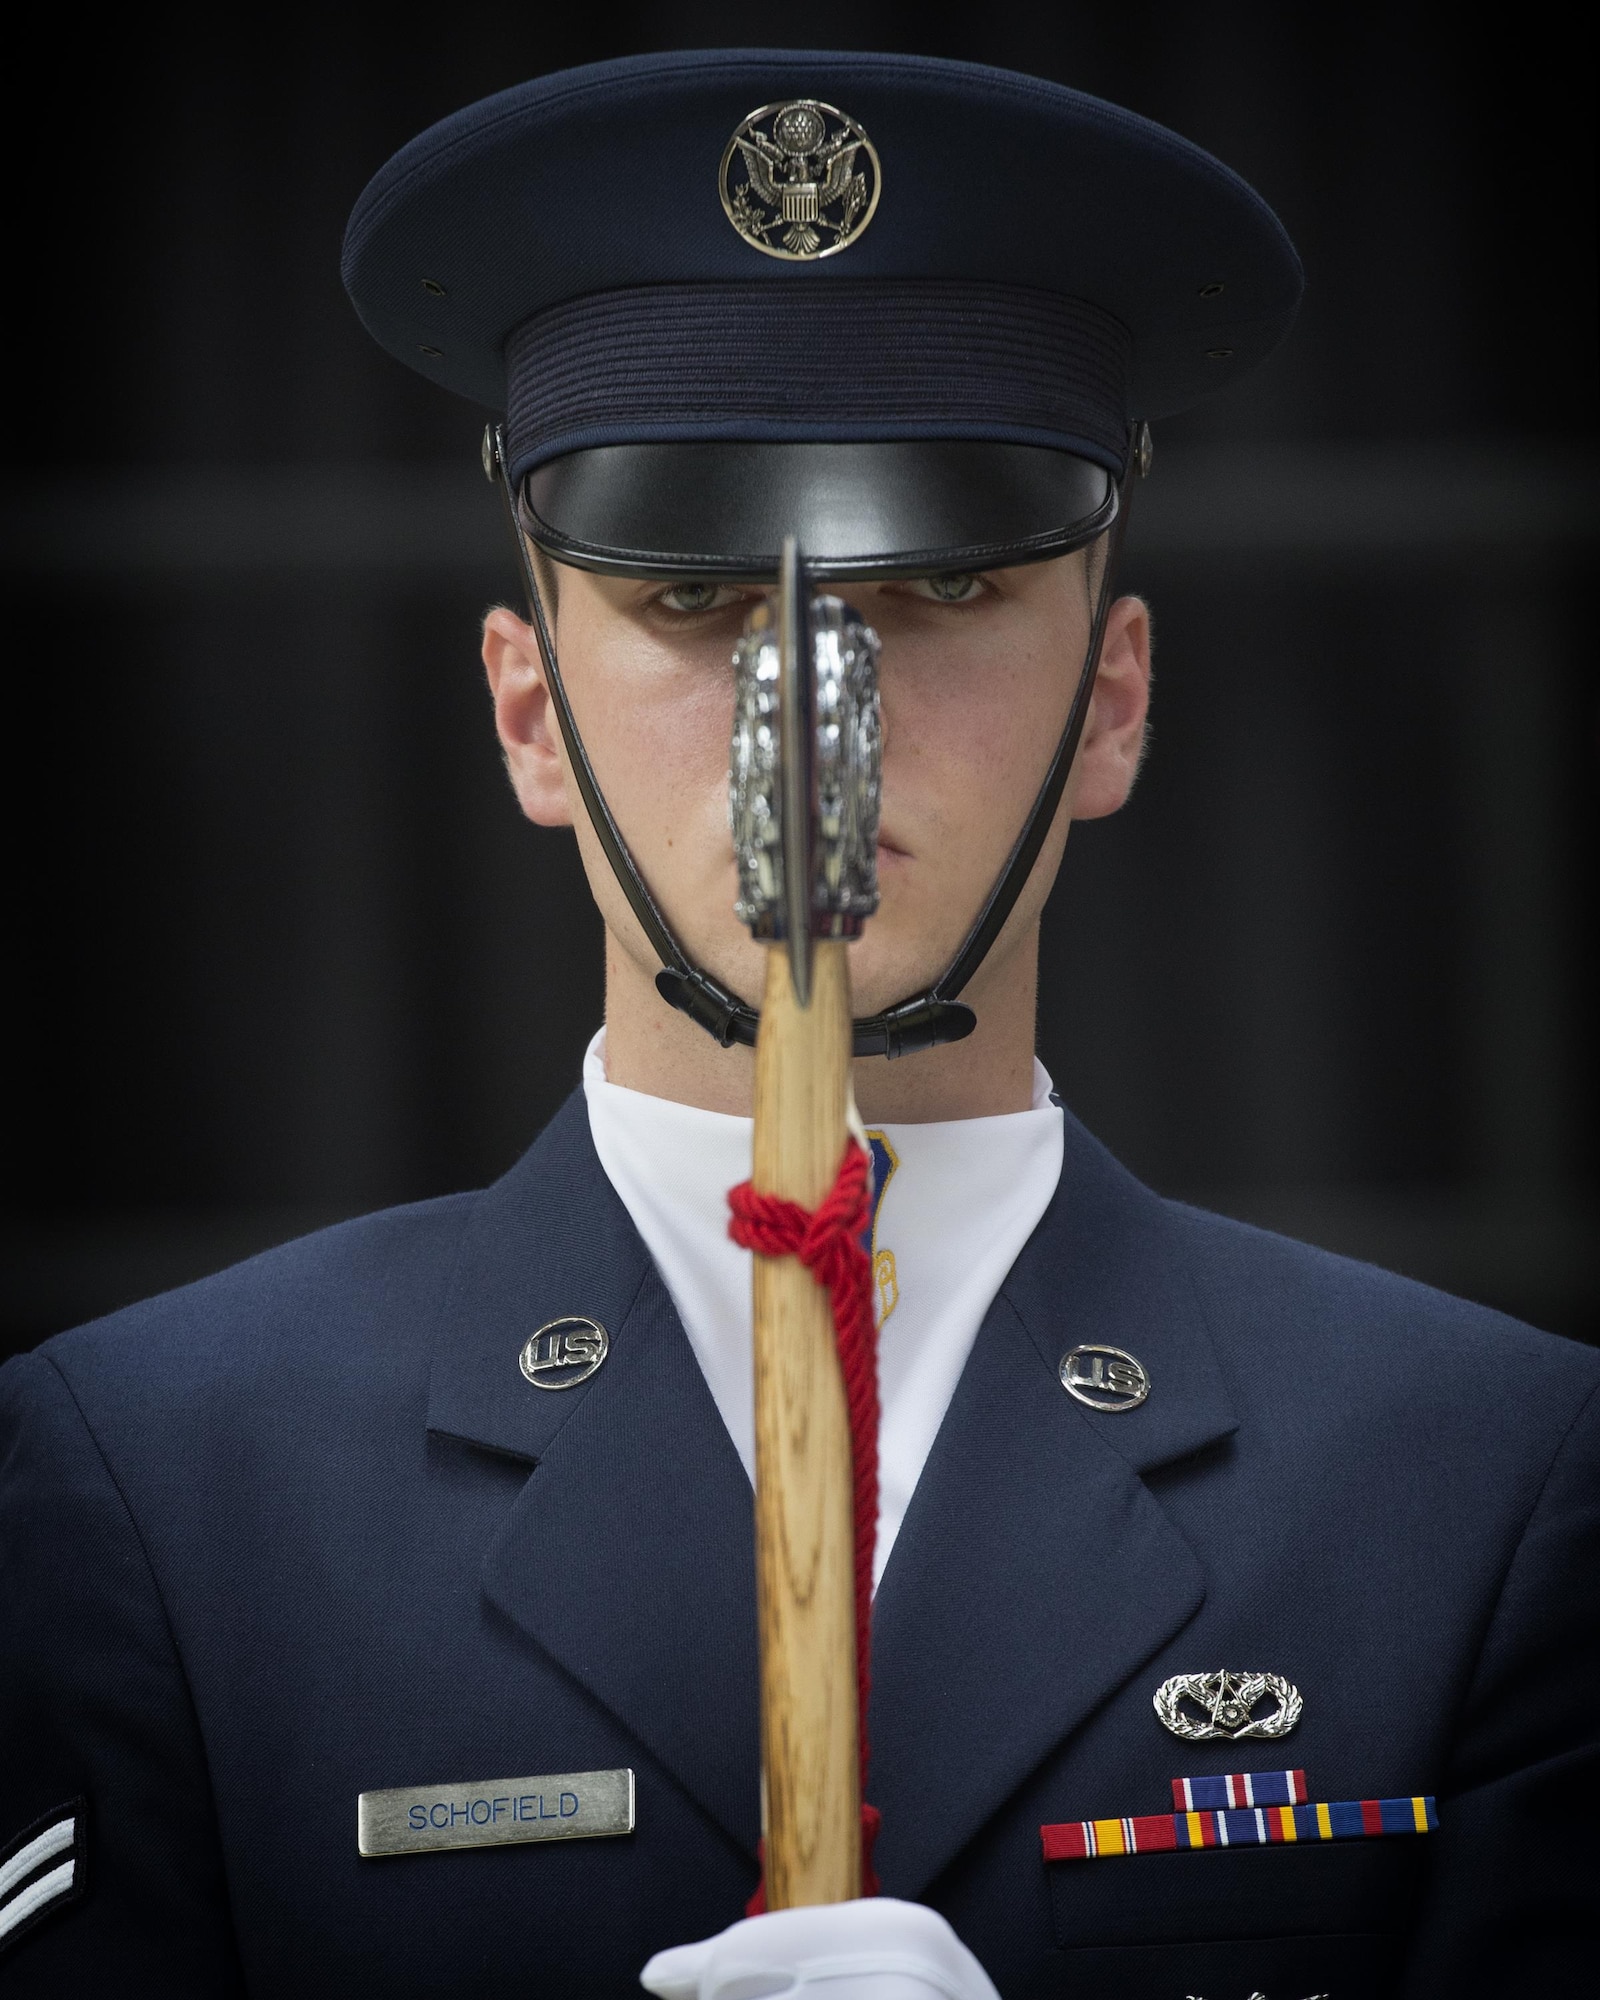 Airman 1st Class Zachary Schofield, Yokota honor guardsman, holds a ceremonial axe representing the 374th Mission Support Group, under the command of Col. Scott Maskery, during the 374 MSG change of command ceremony at Yokota Air Base, Japan, Aug. 8, 2016. Masa-kari, or axe in Japanese, is the nickname local community leaders gave to Maskery, because its similarity to the colonel’s last name. (U.S. Air Force photo by Yasuo Osakabe) 